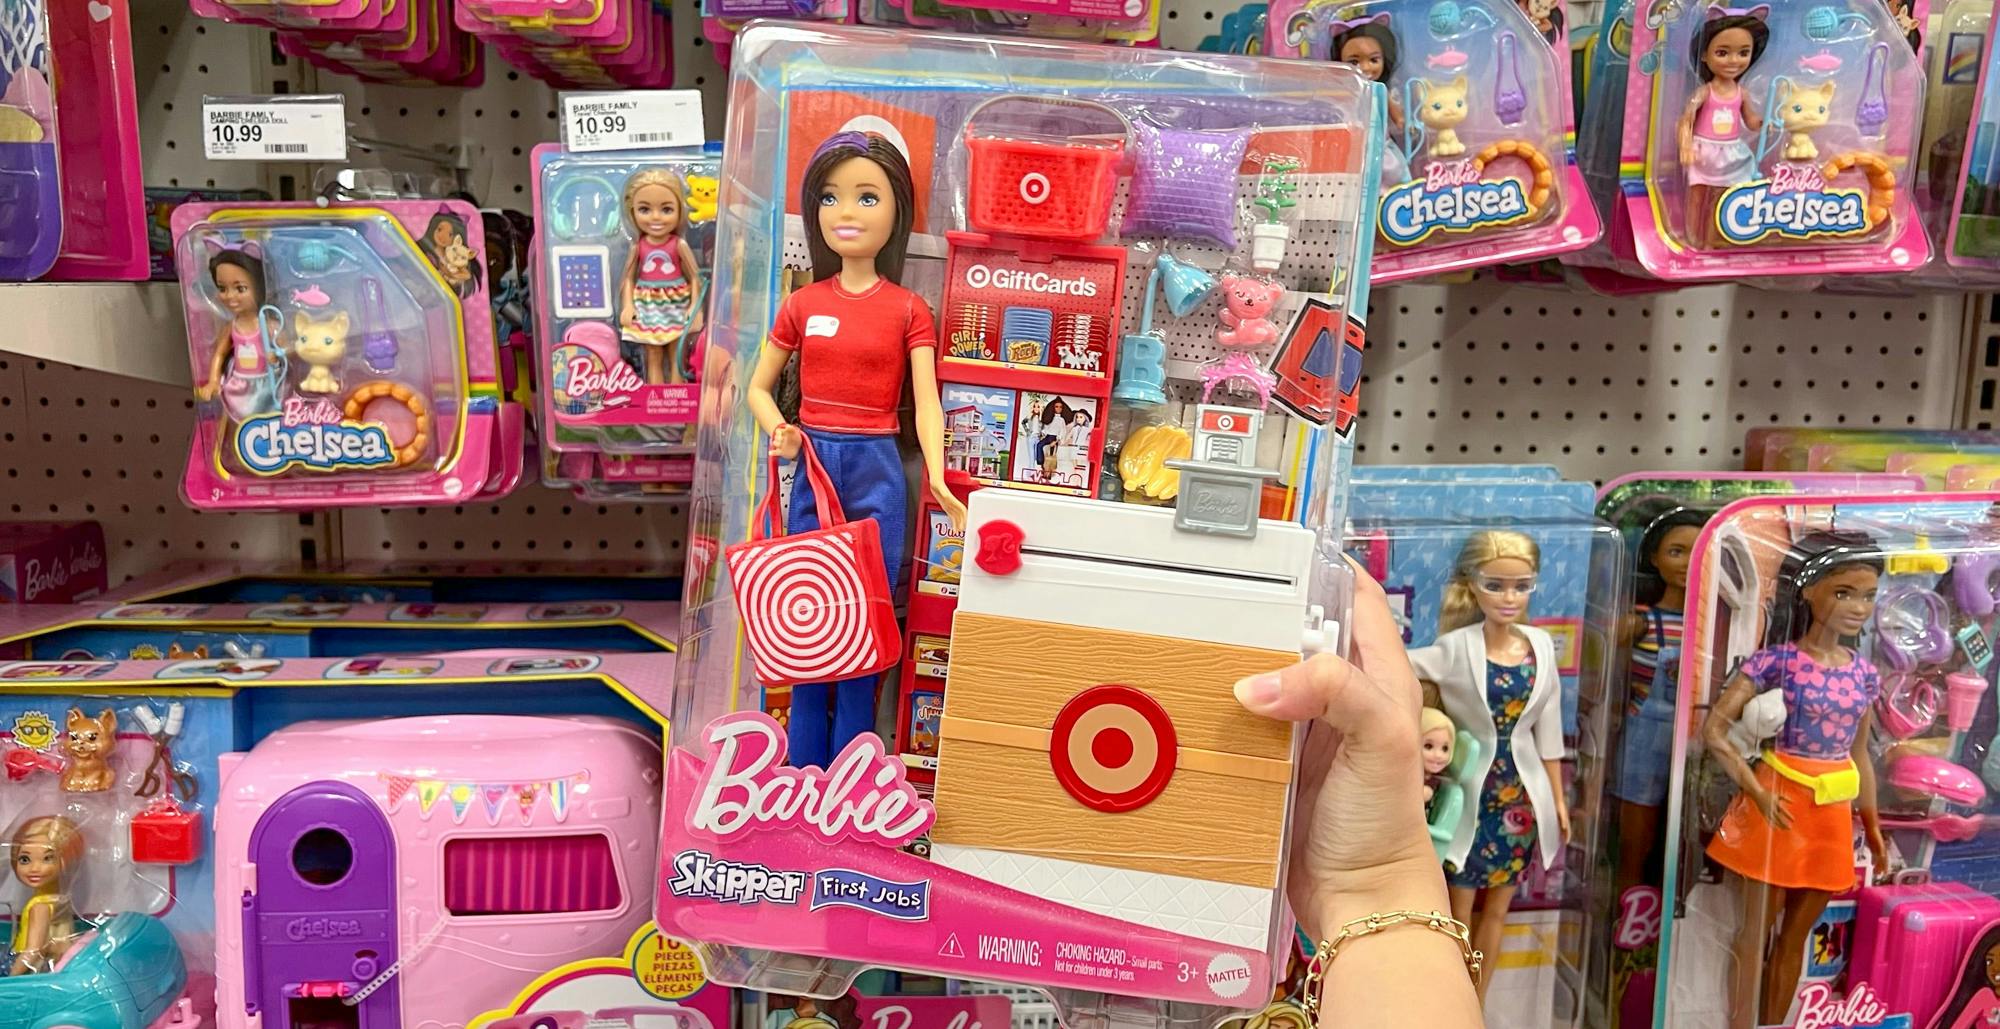 Vervuild lamp bodem Where to Find Target Barbie Doll (Skipper First Job Barbie) - The Krazy  Coupon Lady